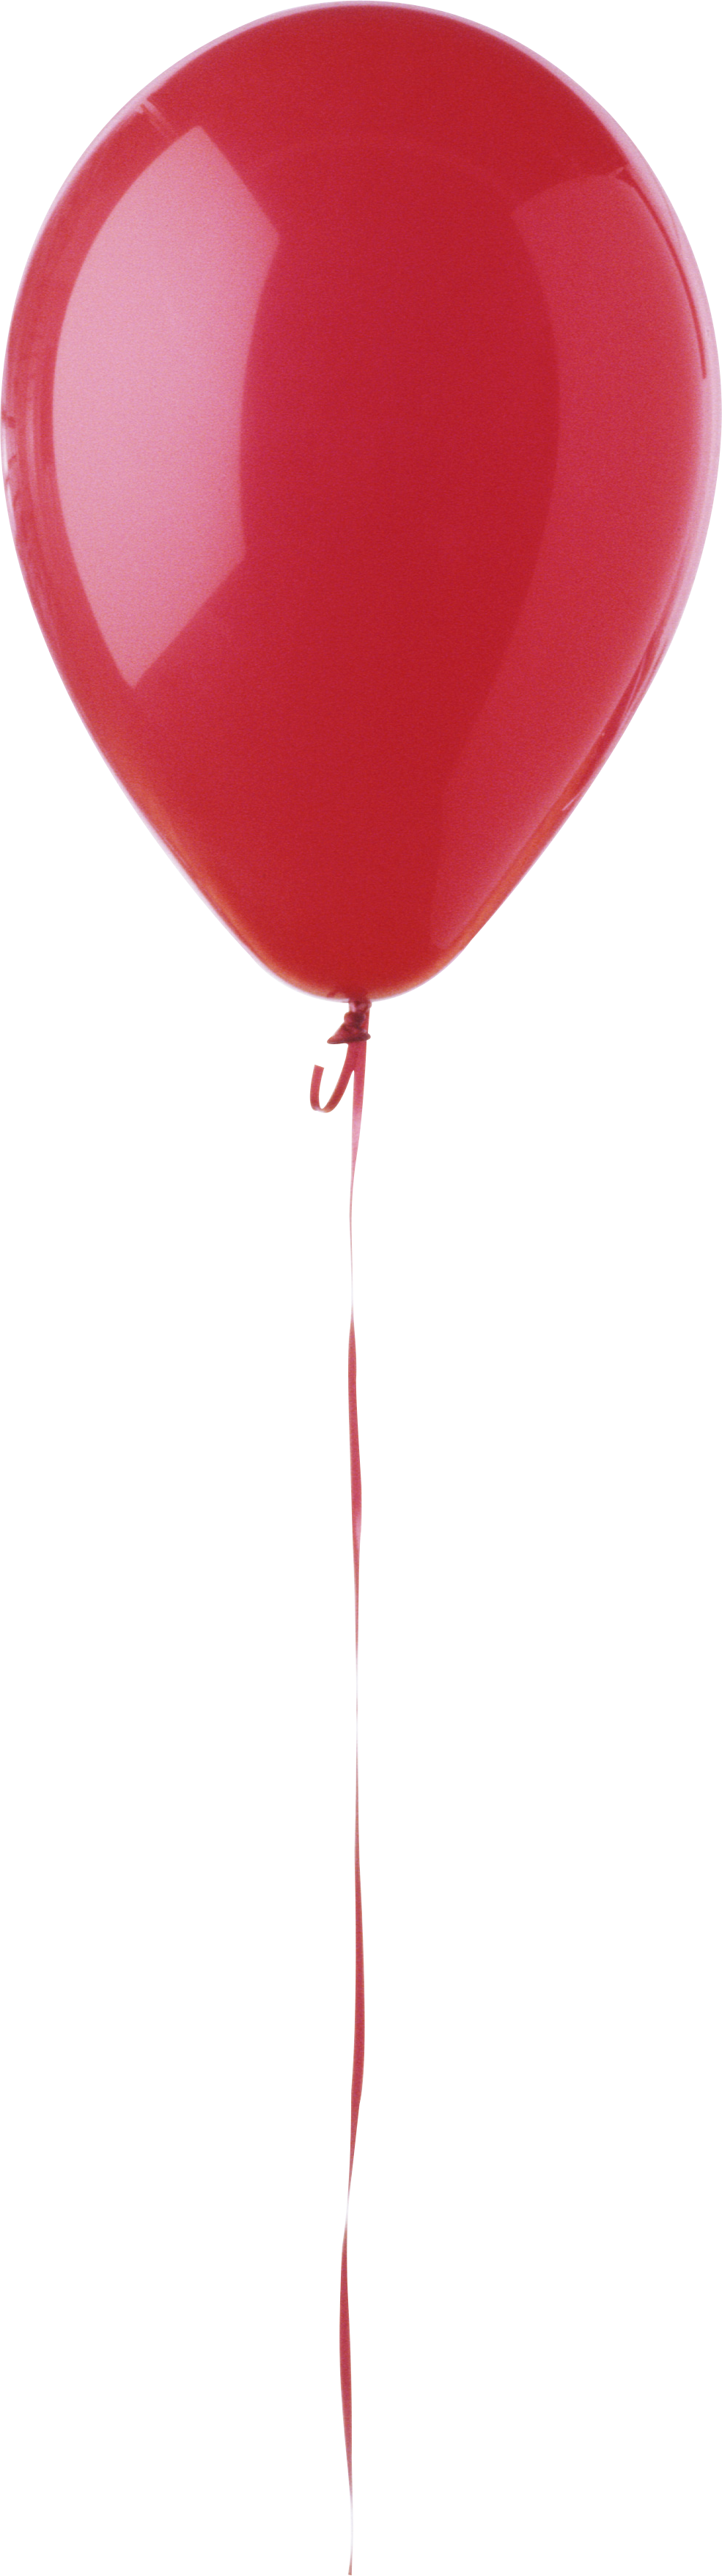 One Balloon Png Transparent One Balloon Png Images Pluspng 1160 | The ...